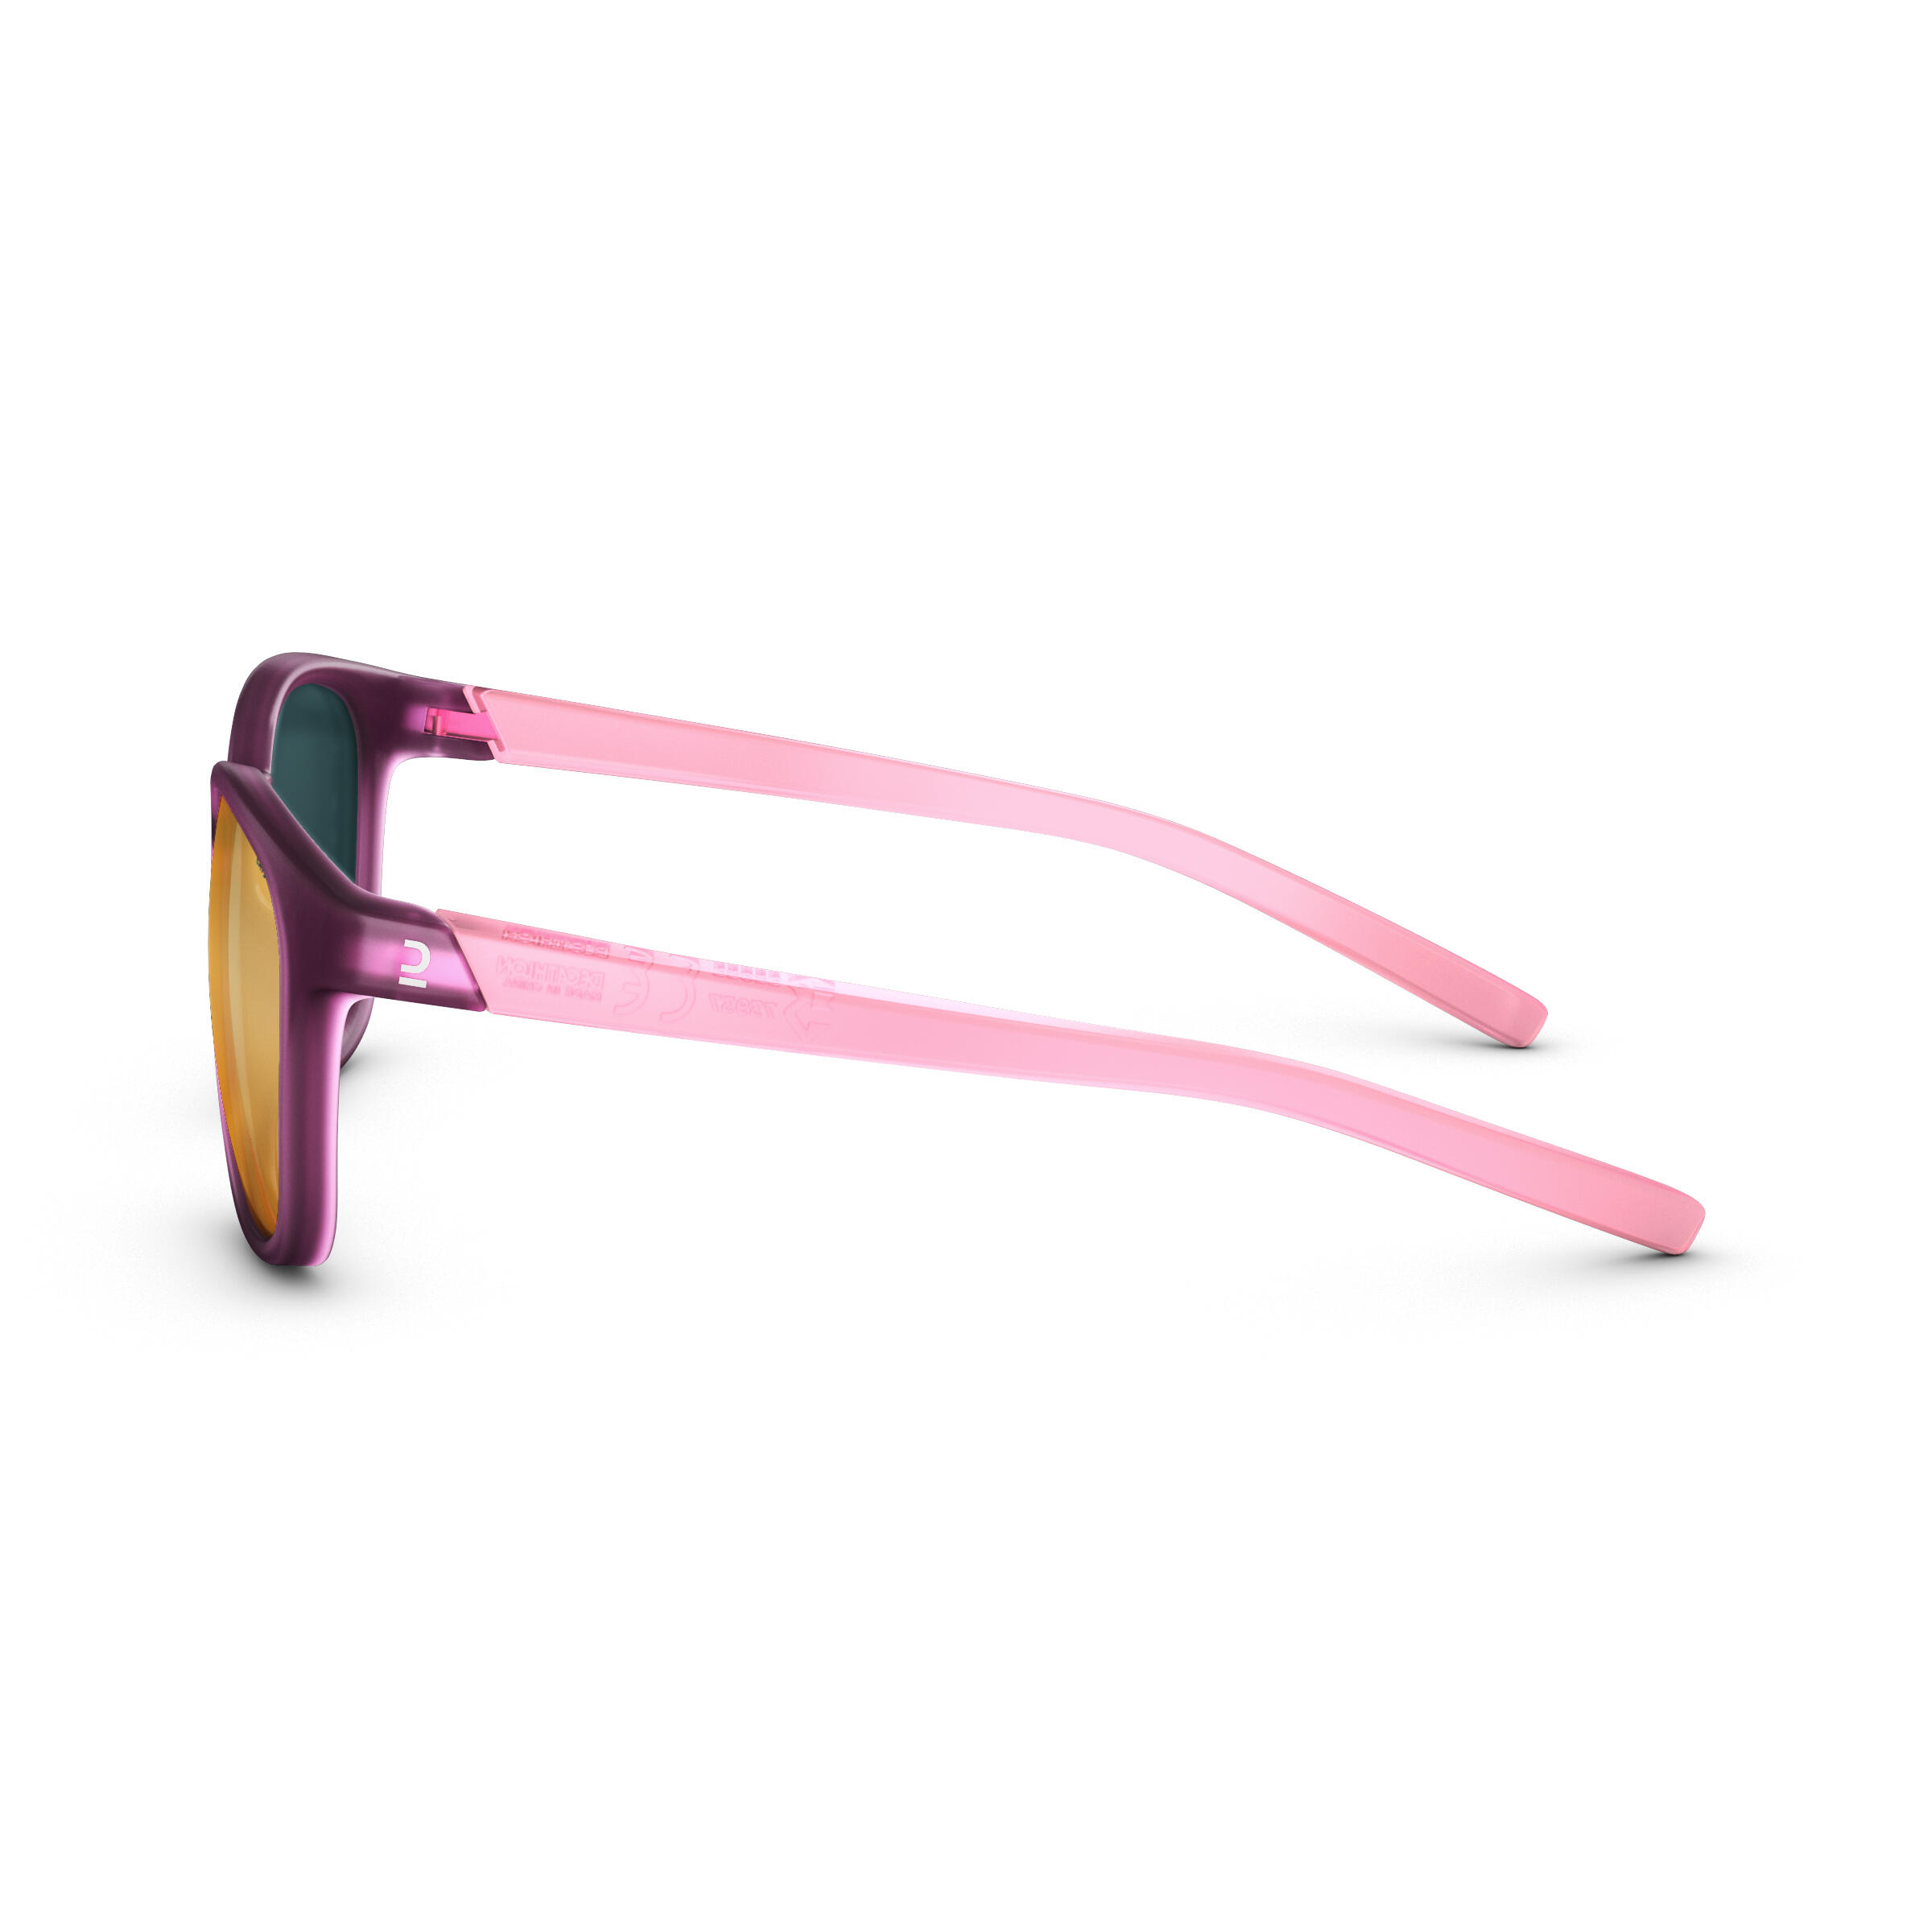 Adult - Hiking Sunglasses - MH160 - Category 3 8/11